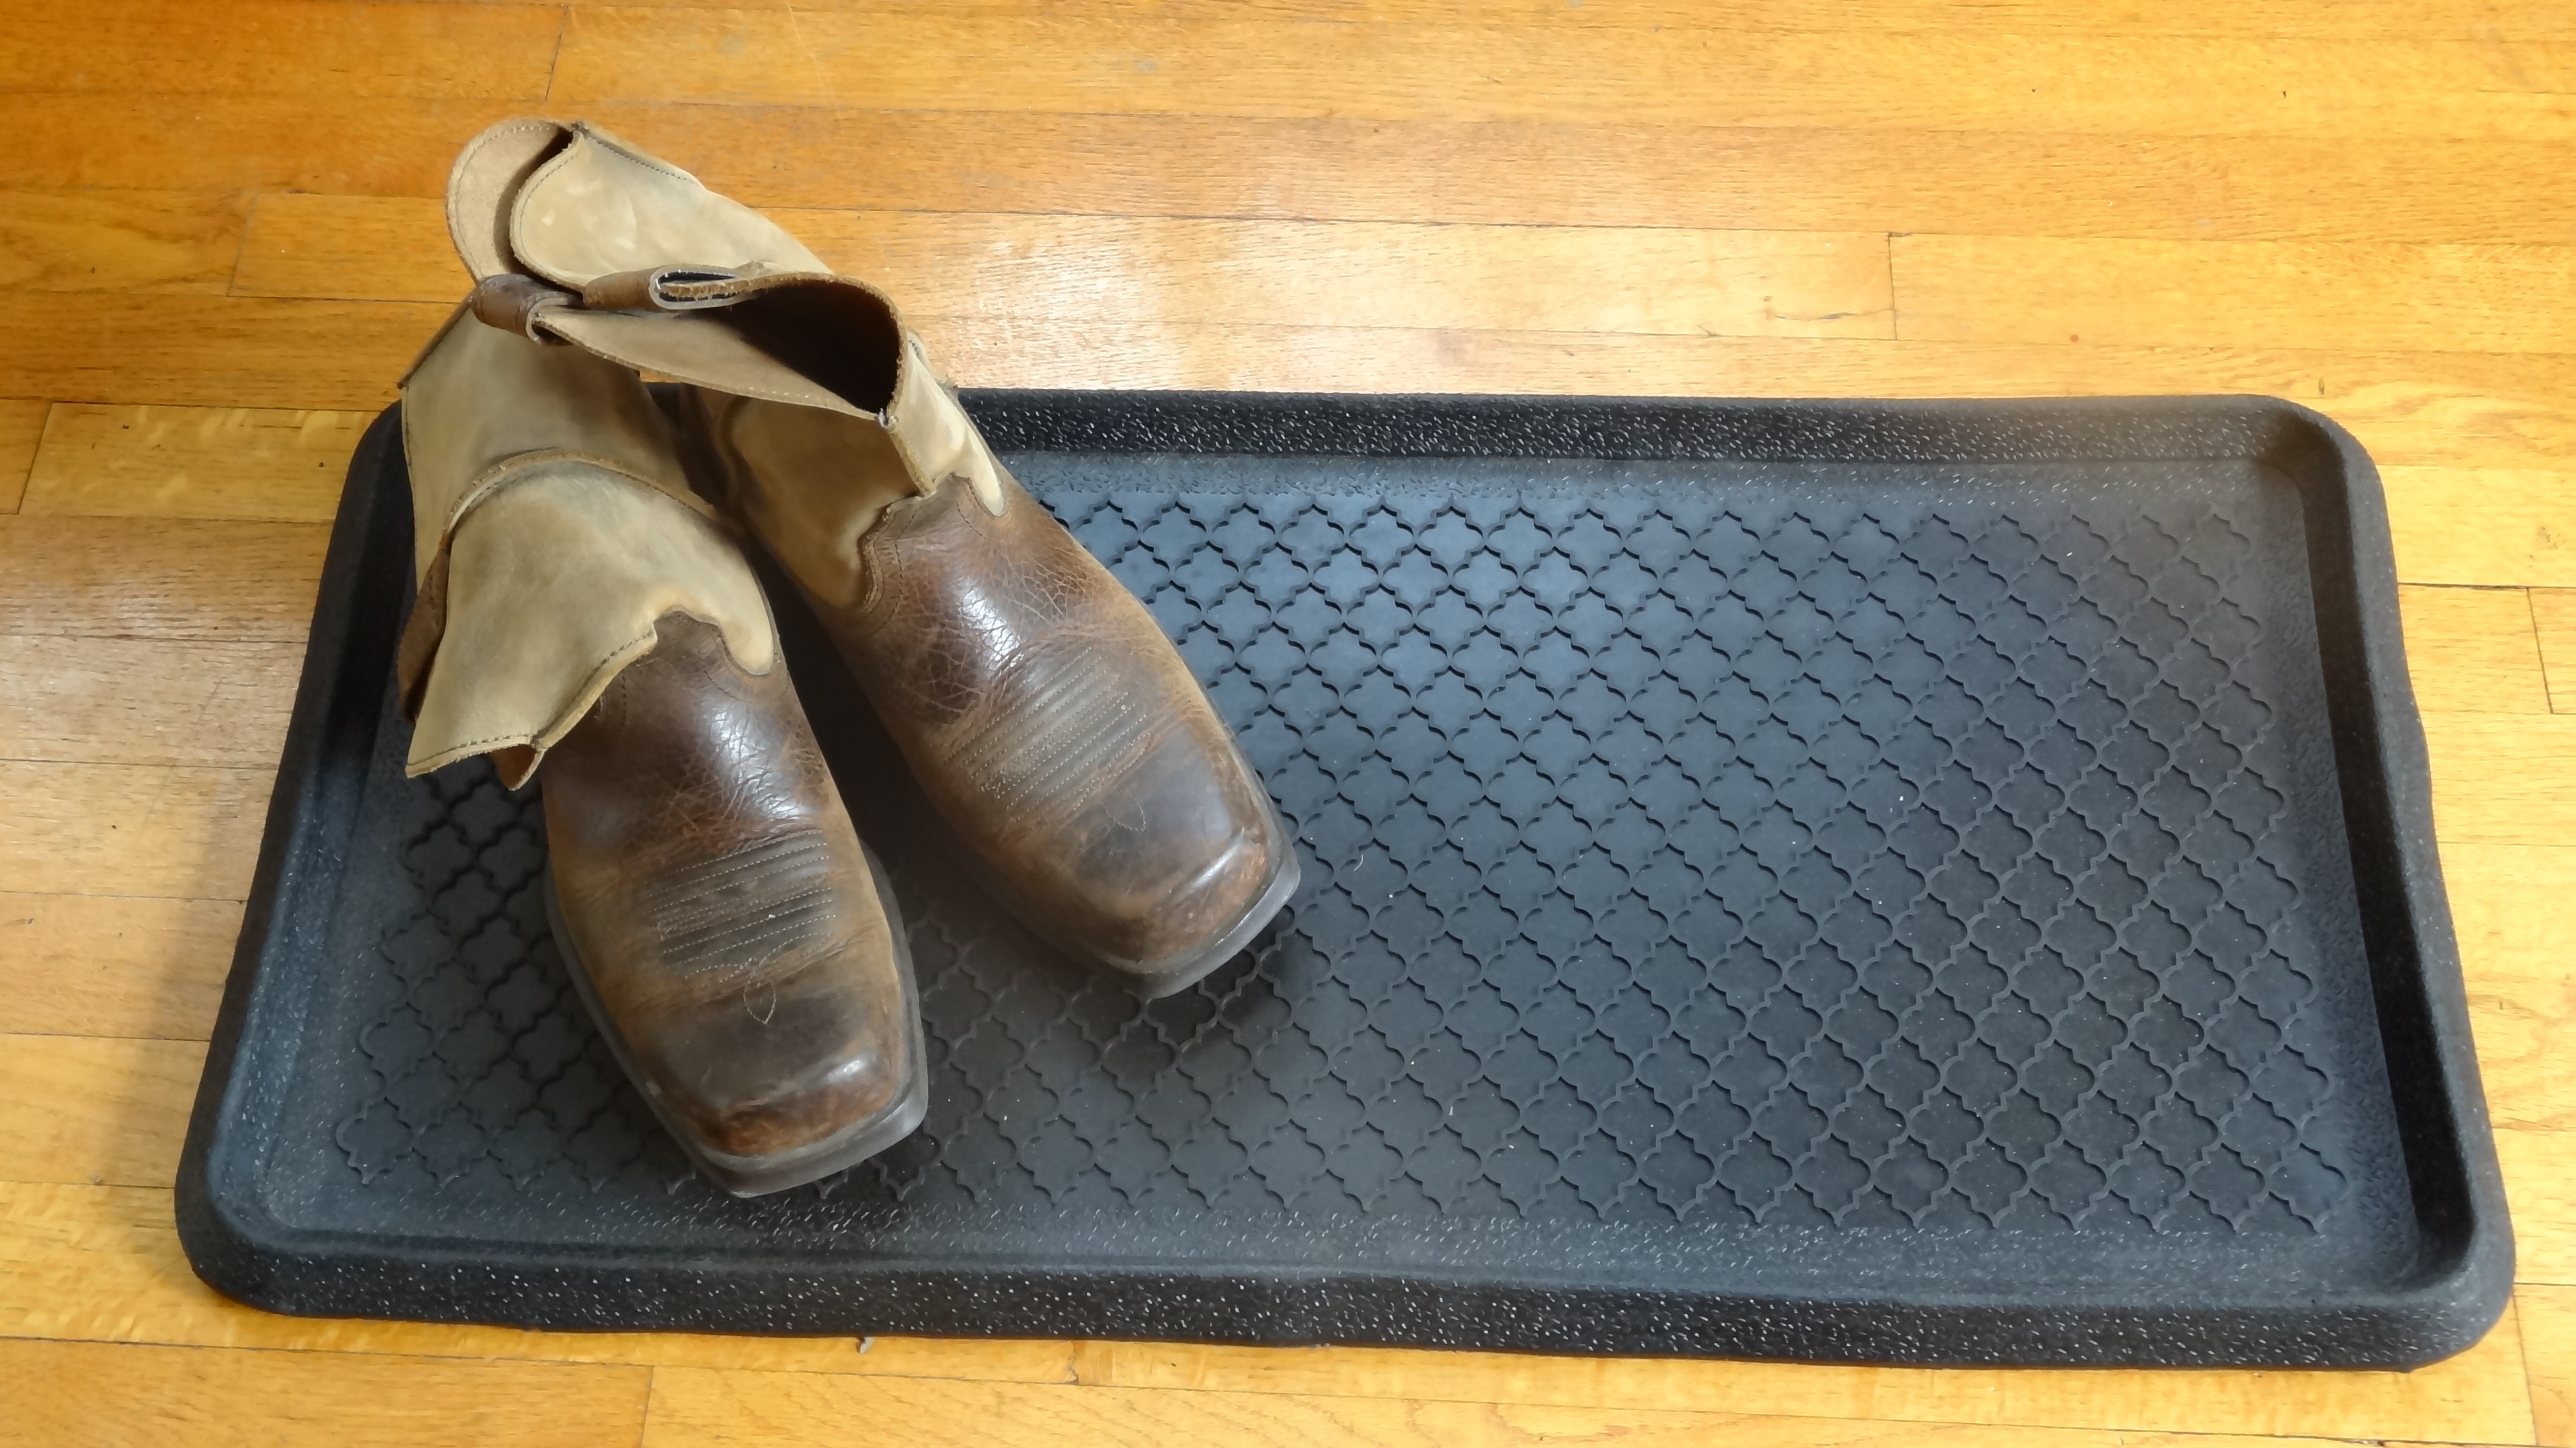 https://www.everythingdoormats.com/images/products/quarterfoil-embossed-rubber-boot-tray-36-16-1-tr0026.jpg